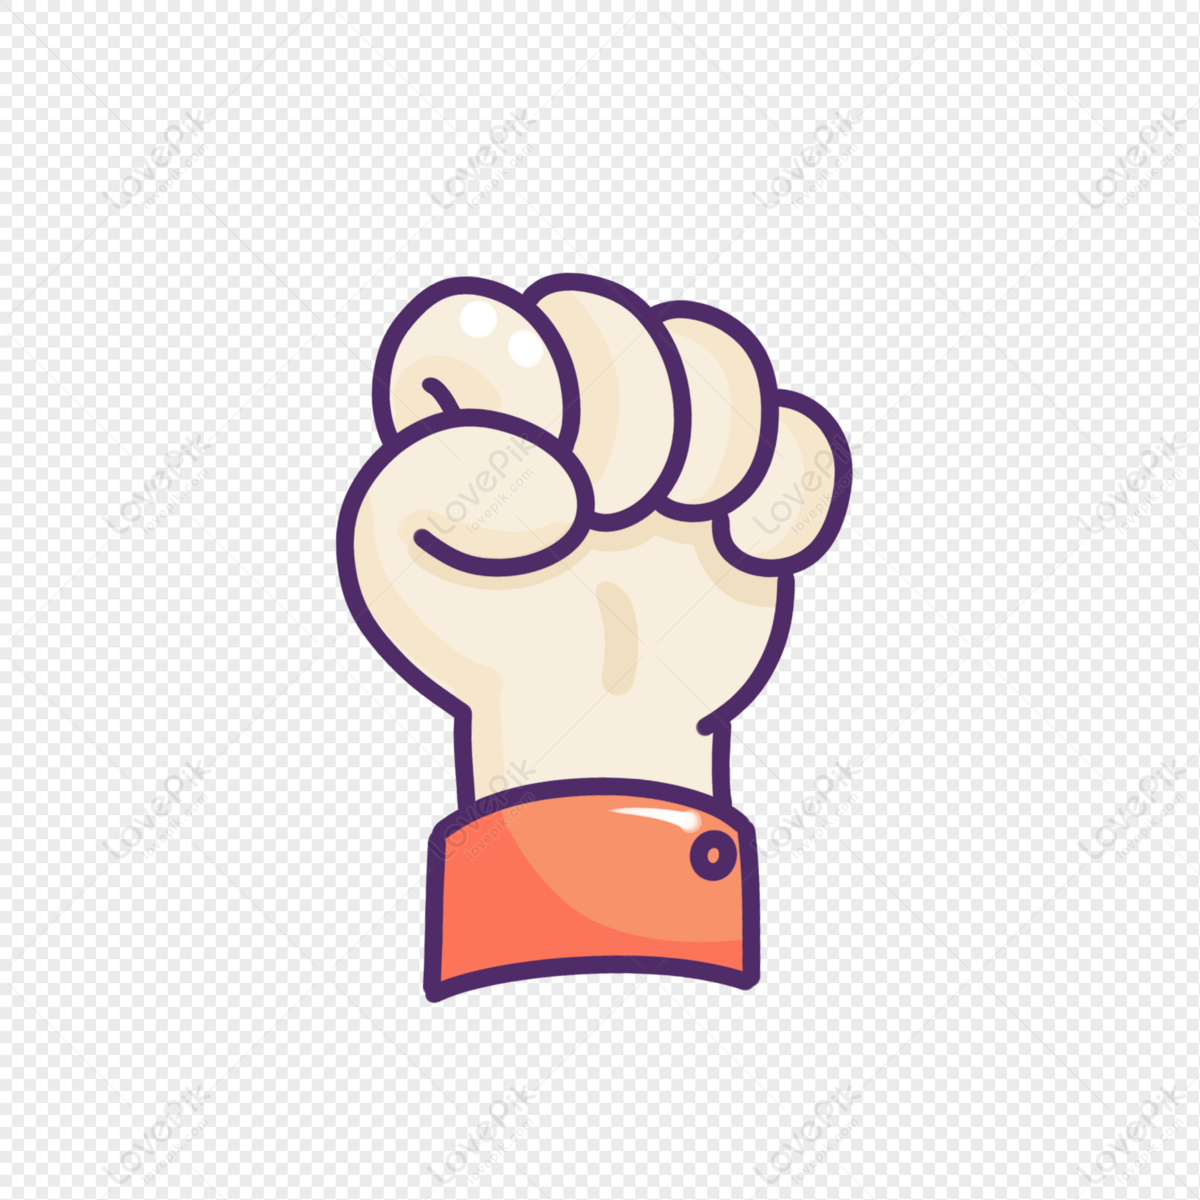 Fist Free PNG And Clipart Image For Free Download - Lovepik | 401187489